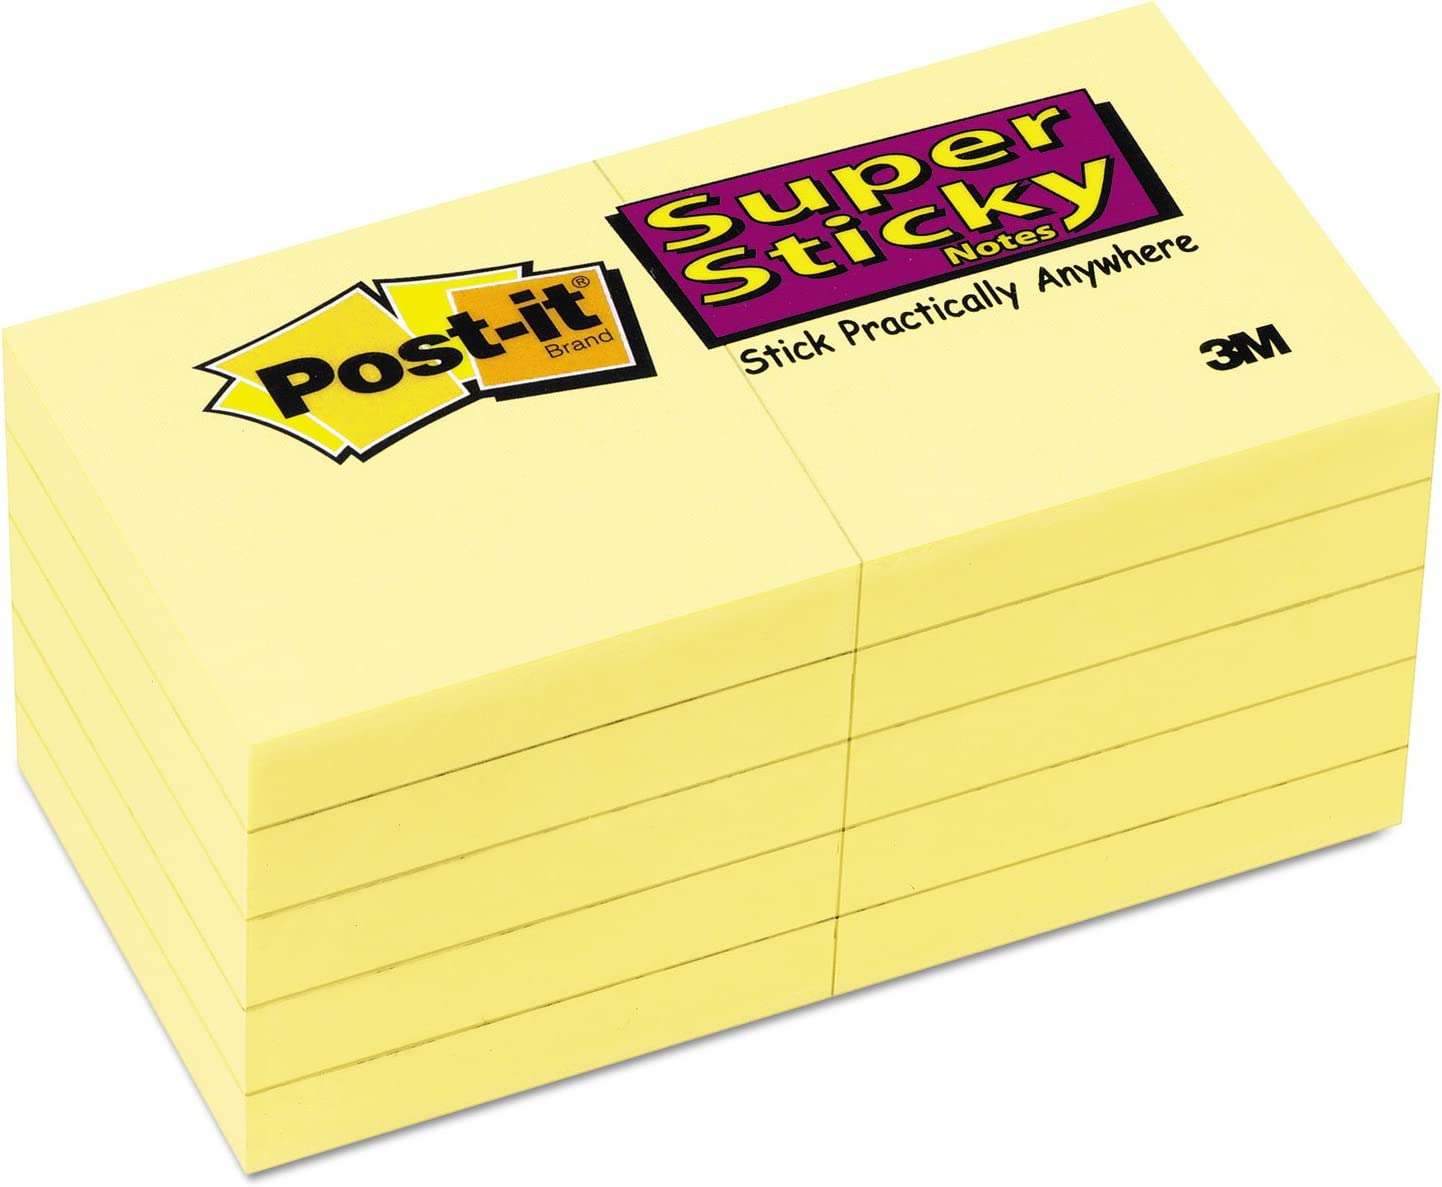 Post-it Super Sticky Notes 2x2 in 10 Pads 2x the Sticking Power Canary Yellow Recyclable (622-10SSCY)